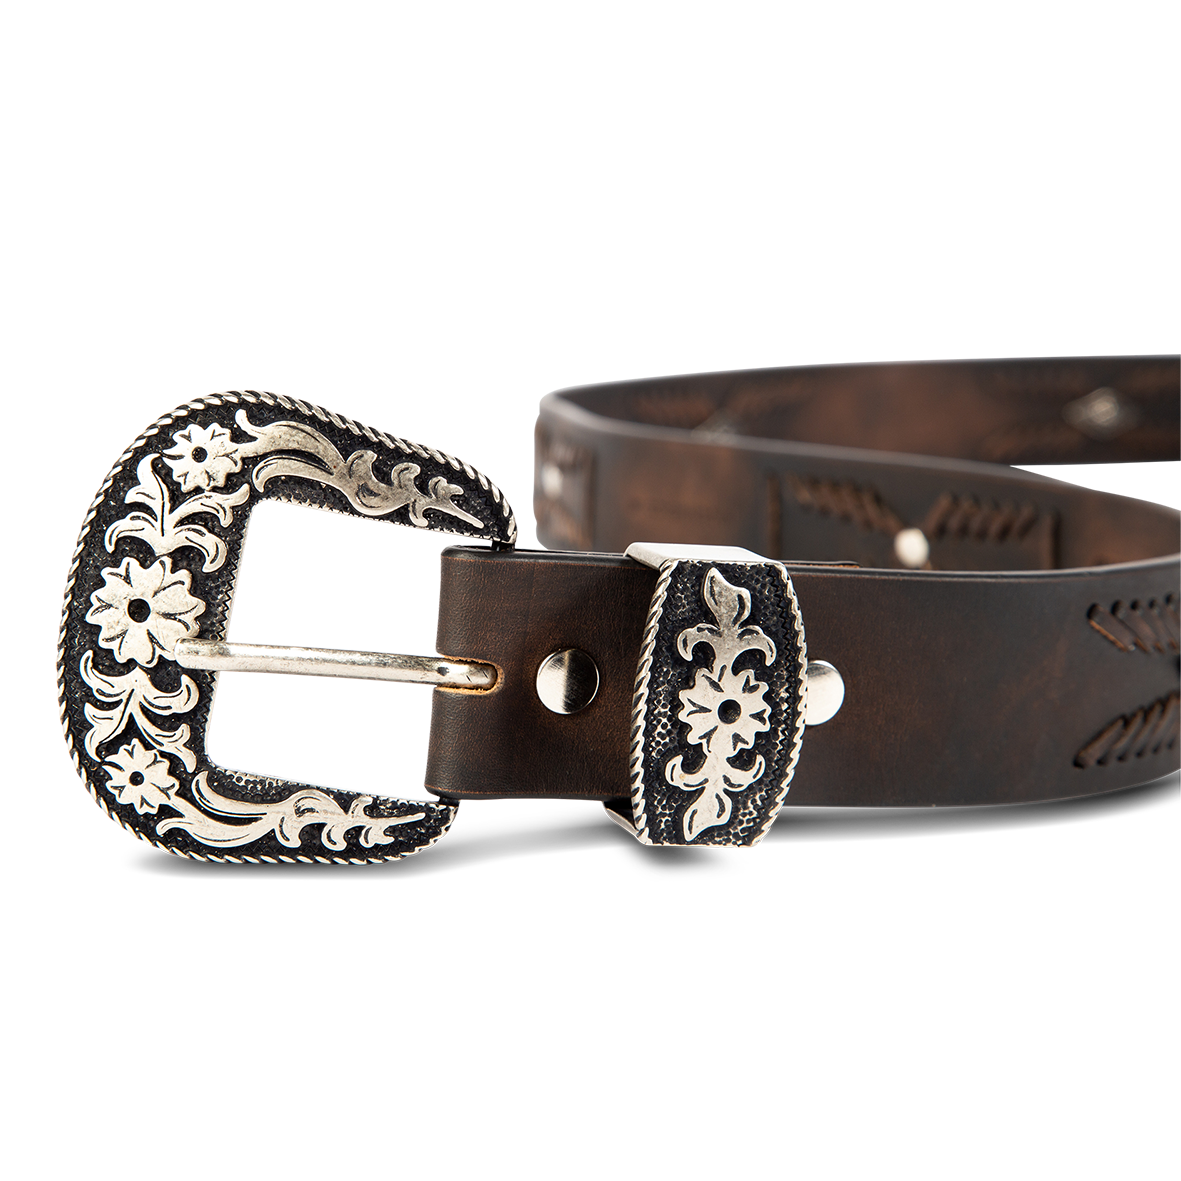 Westbound black distressed front view featuring single buckle engraved hardware closure and embroidered leather detailing  on FREEBIRD full grain leather belt